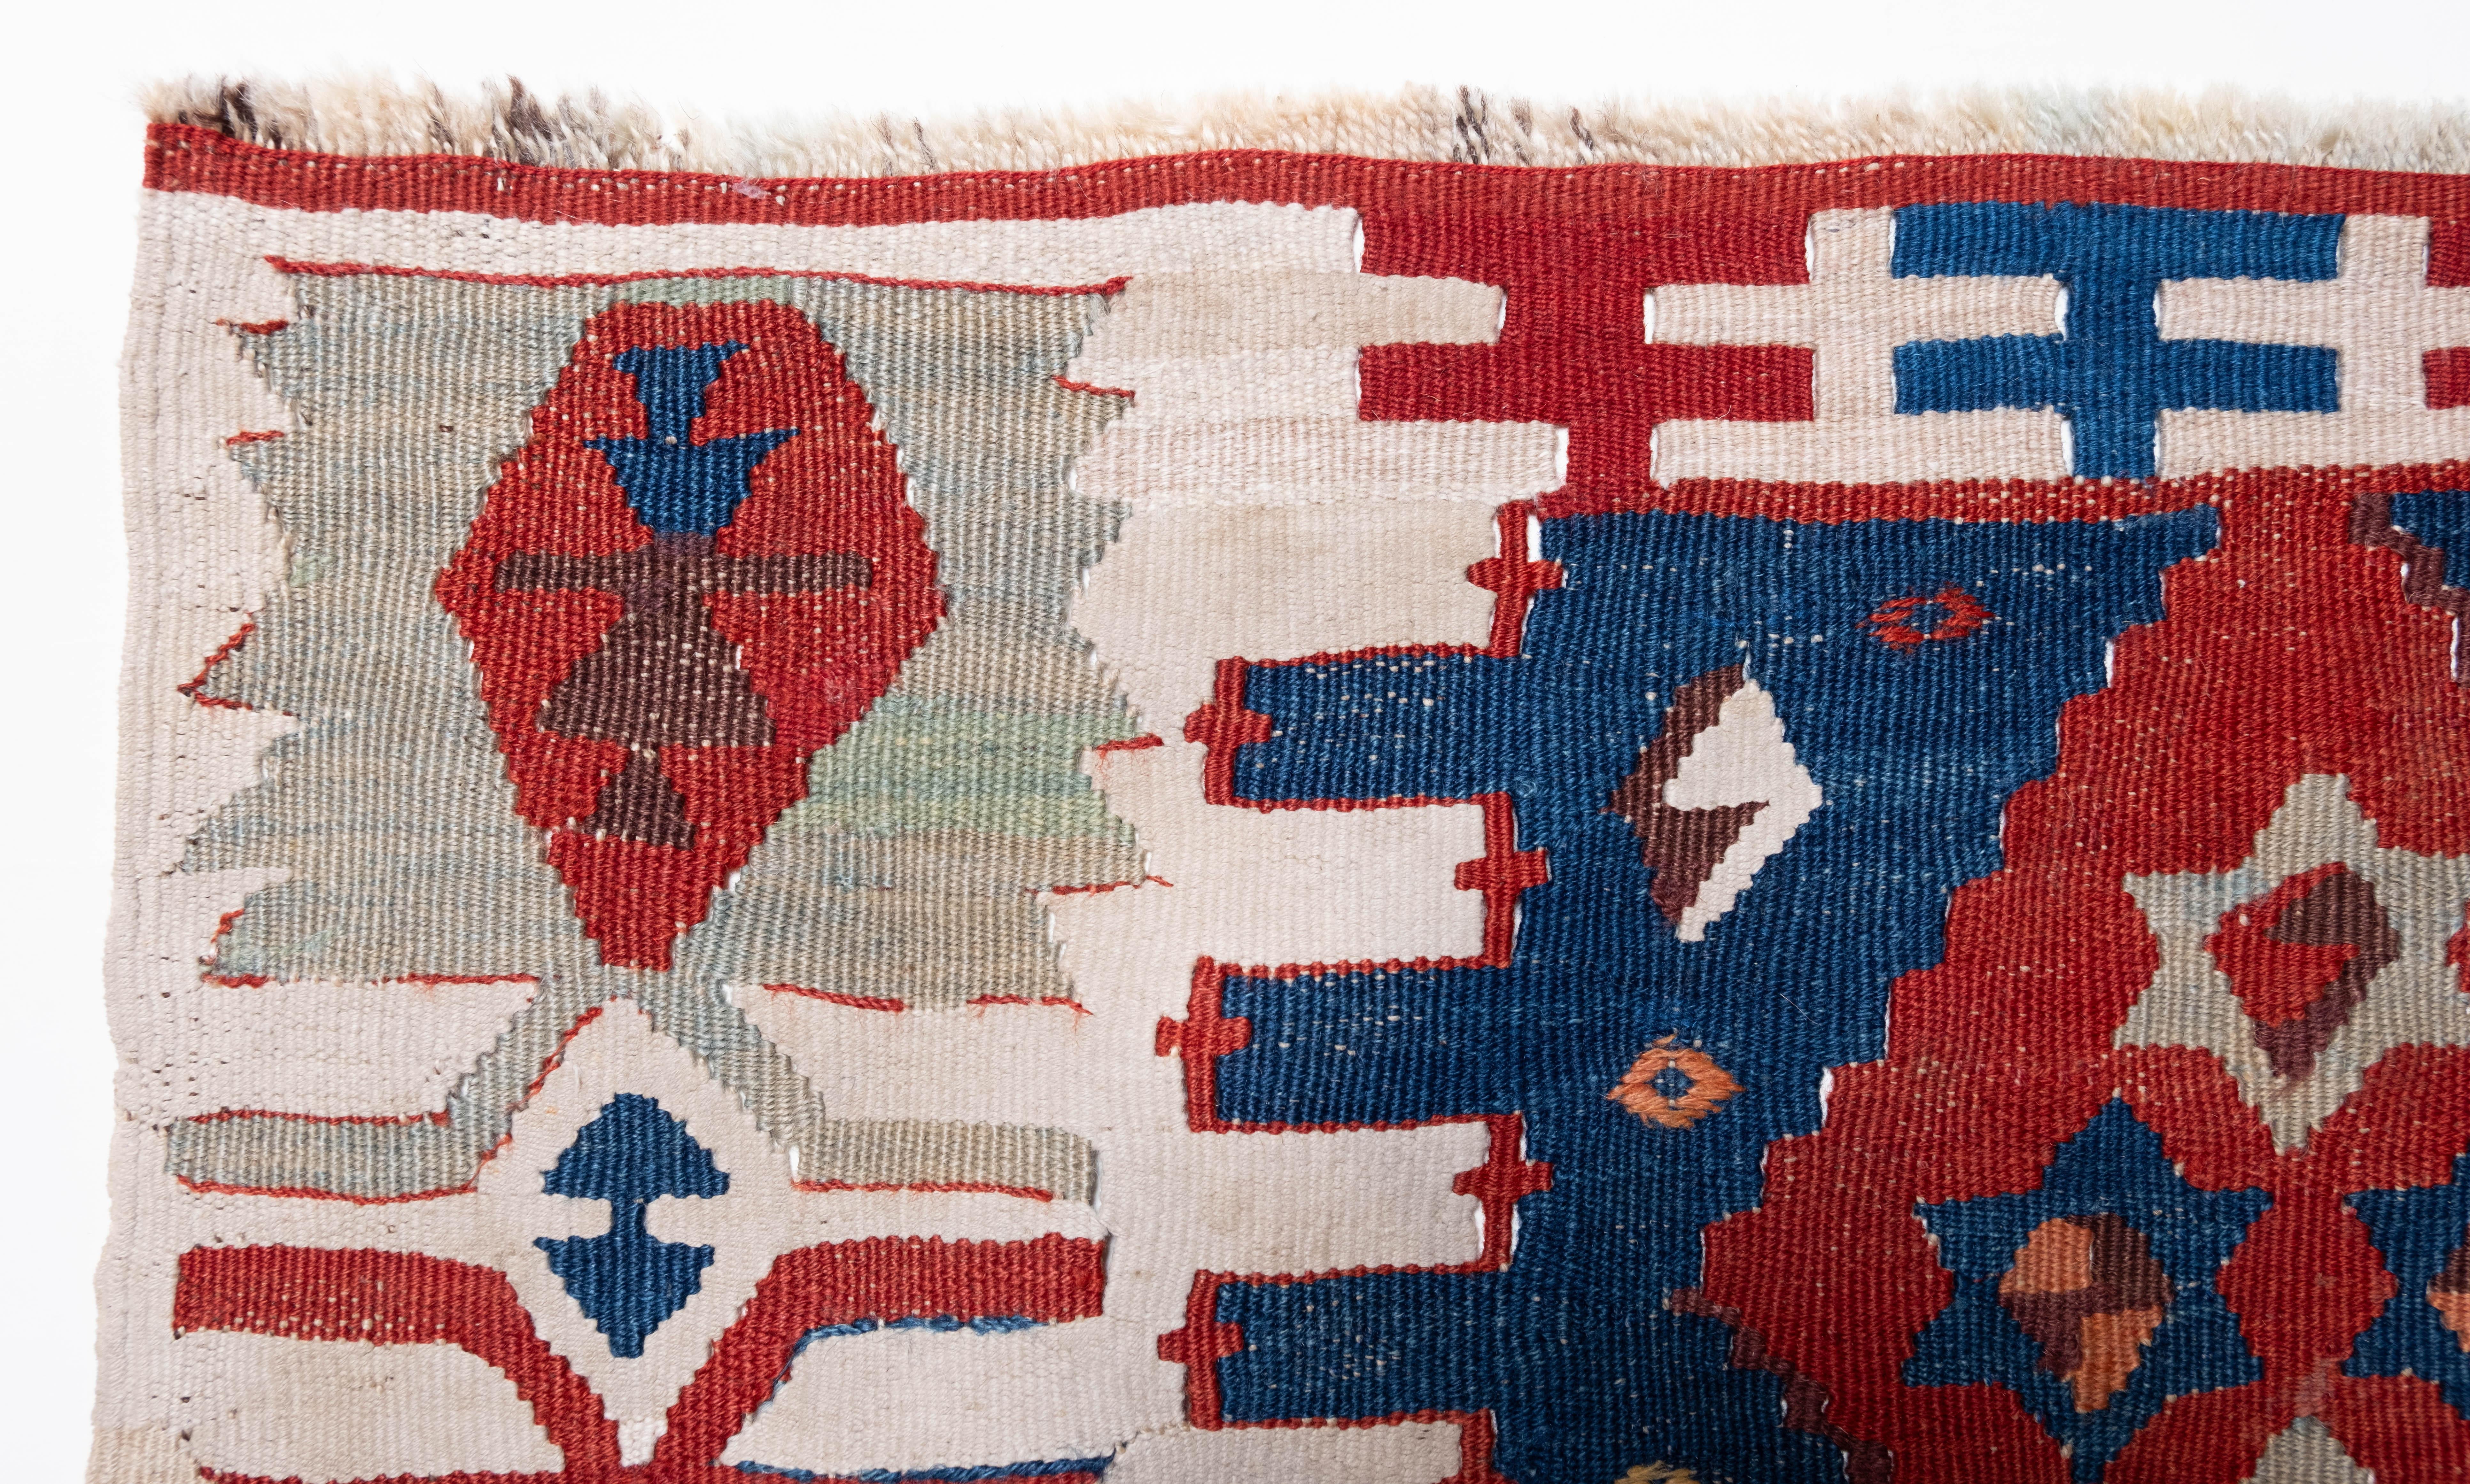 This is Eastern Anatolian Antique Kilim from the Adana region with a rare and beautiful color composition.

This highly collectible antique kilim has wonderful special colors and textures that are typical of an old kilim in good condition. It is a